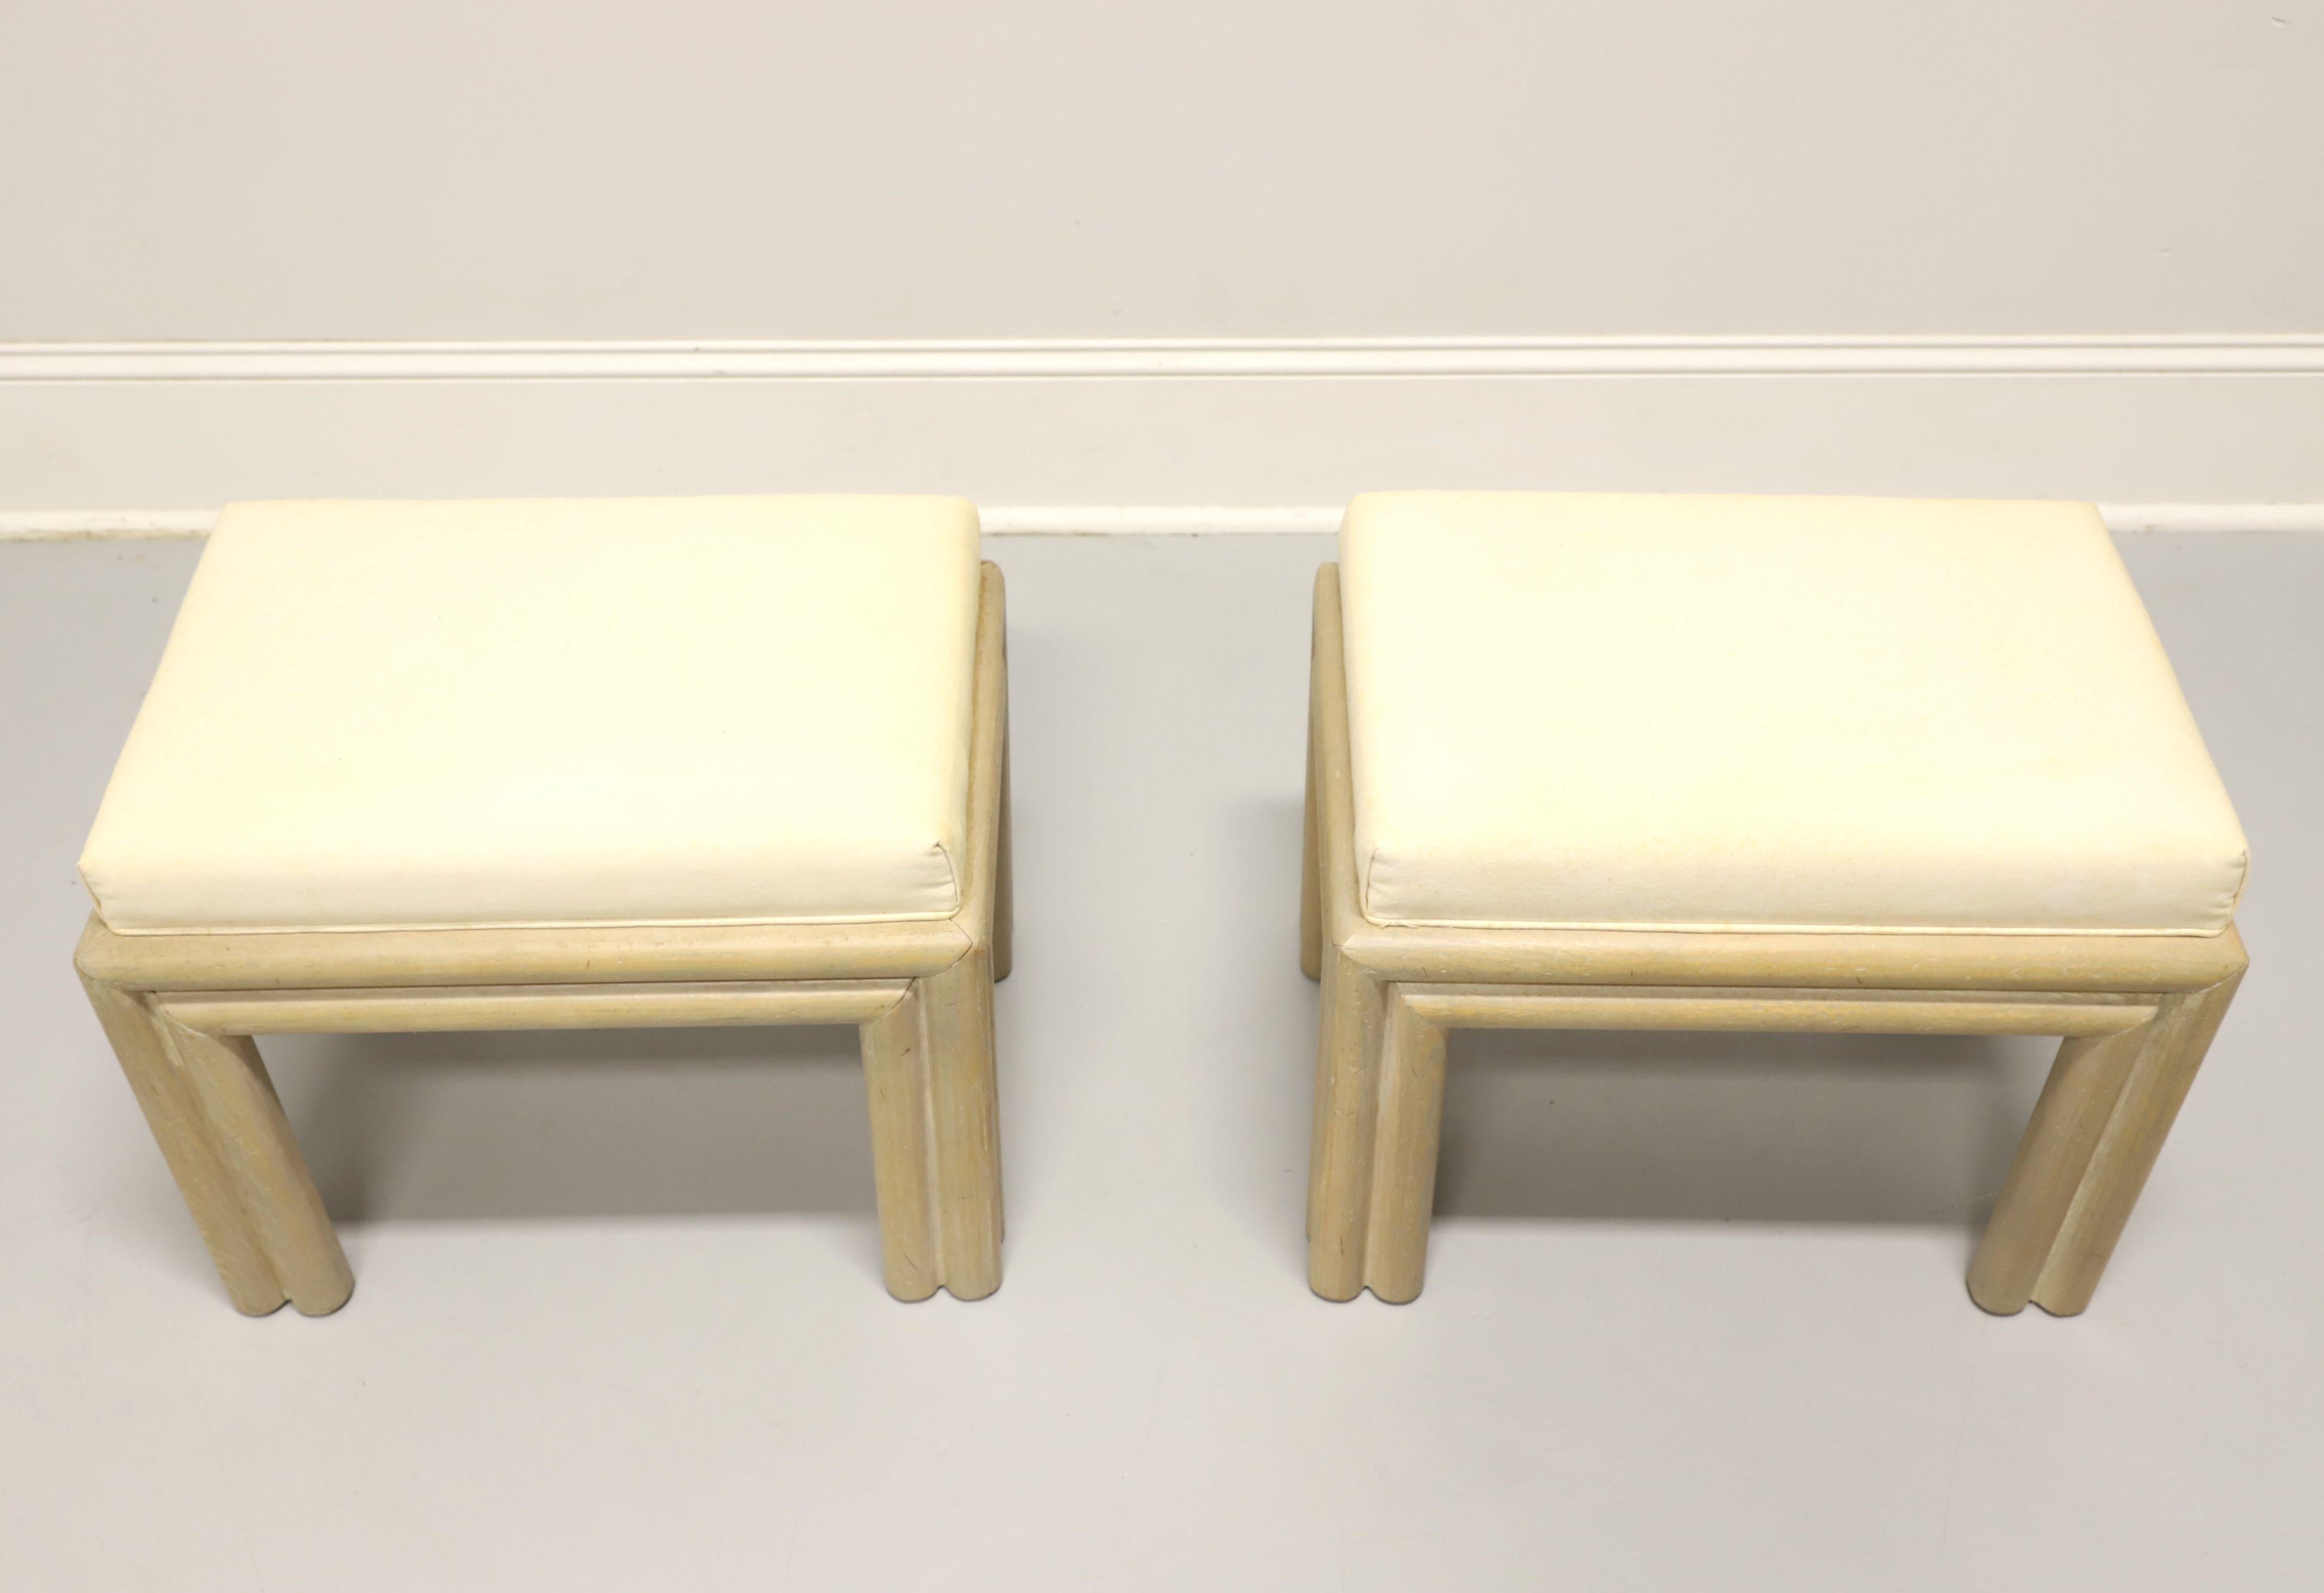 A pair of Contemporary coastal style bench footstools by Hammary, of Lenoir, North Carolina, USA. Solid oak with an antiqued slightly distressed finish, neutral cream color fabric upholstered seat, rounded apron, and rounded straight legs. Made